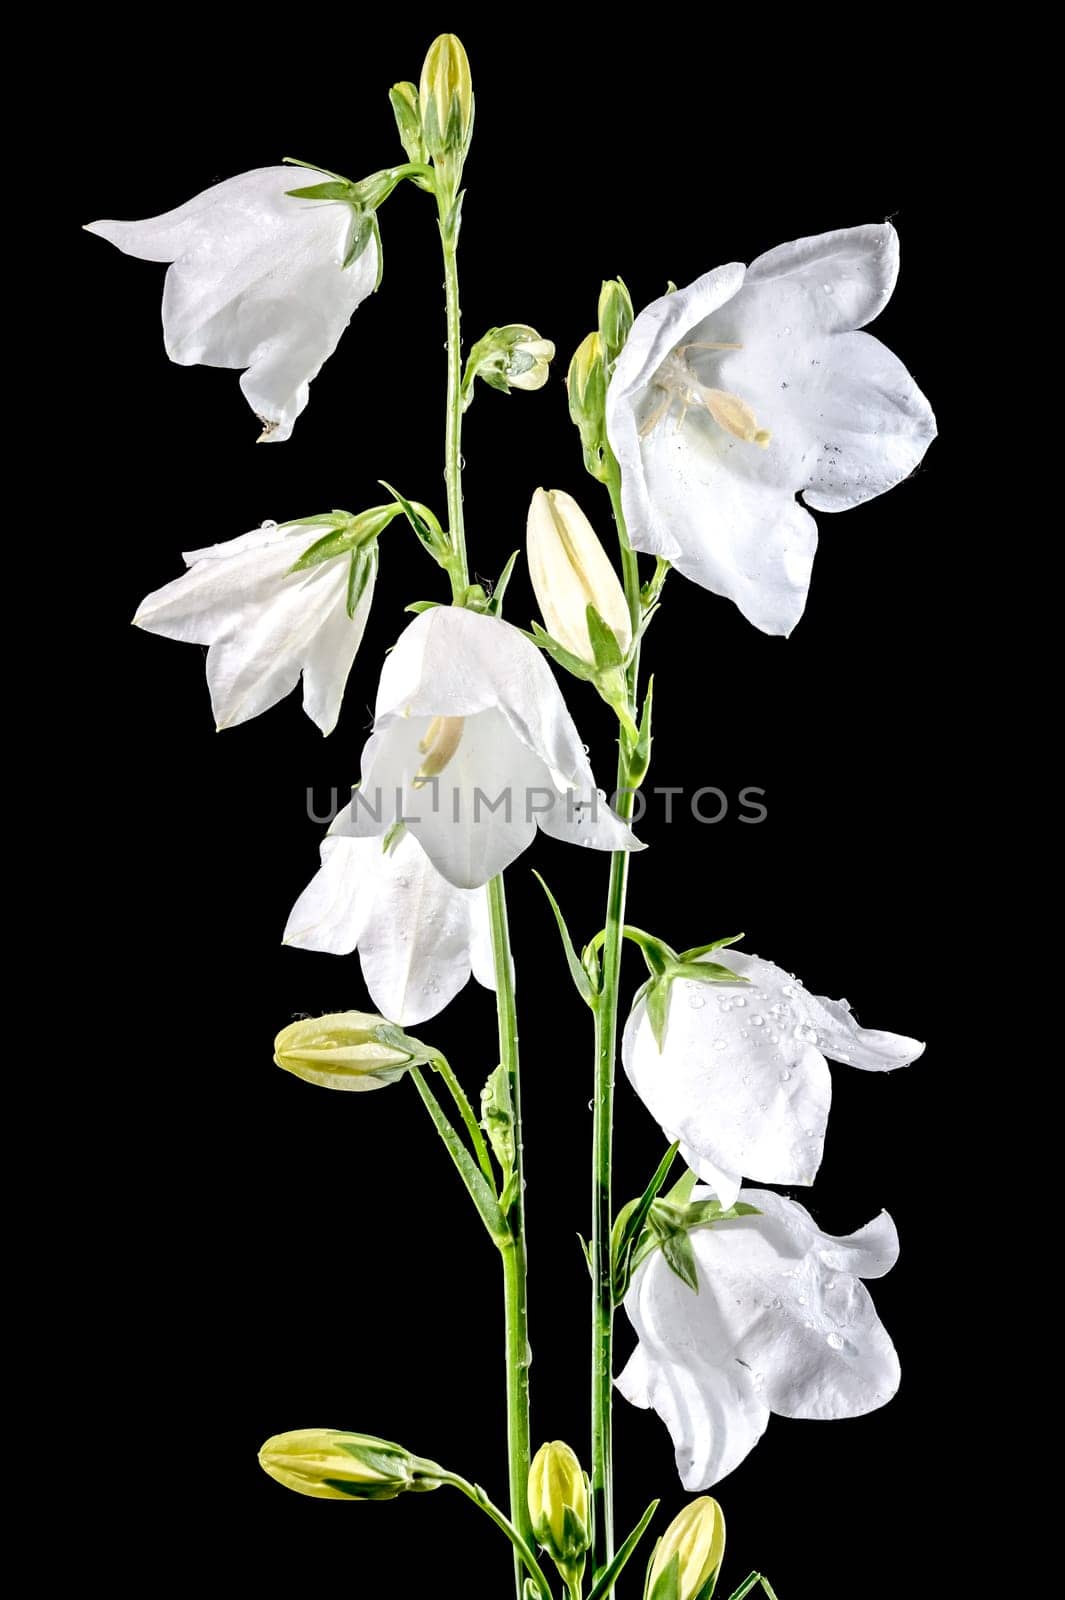 Beautiful Blooming white bellflower or campanula on a black background. Flower head close-up.